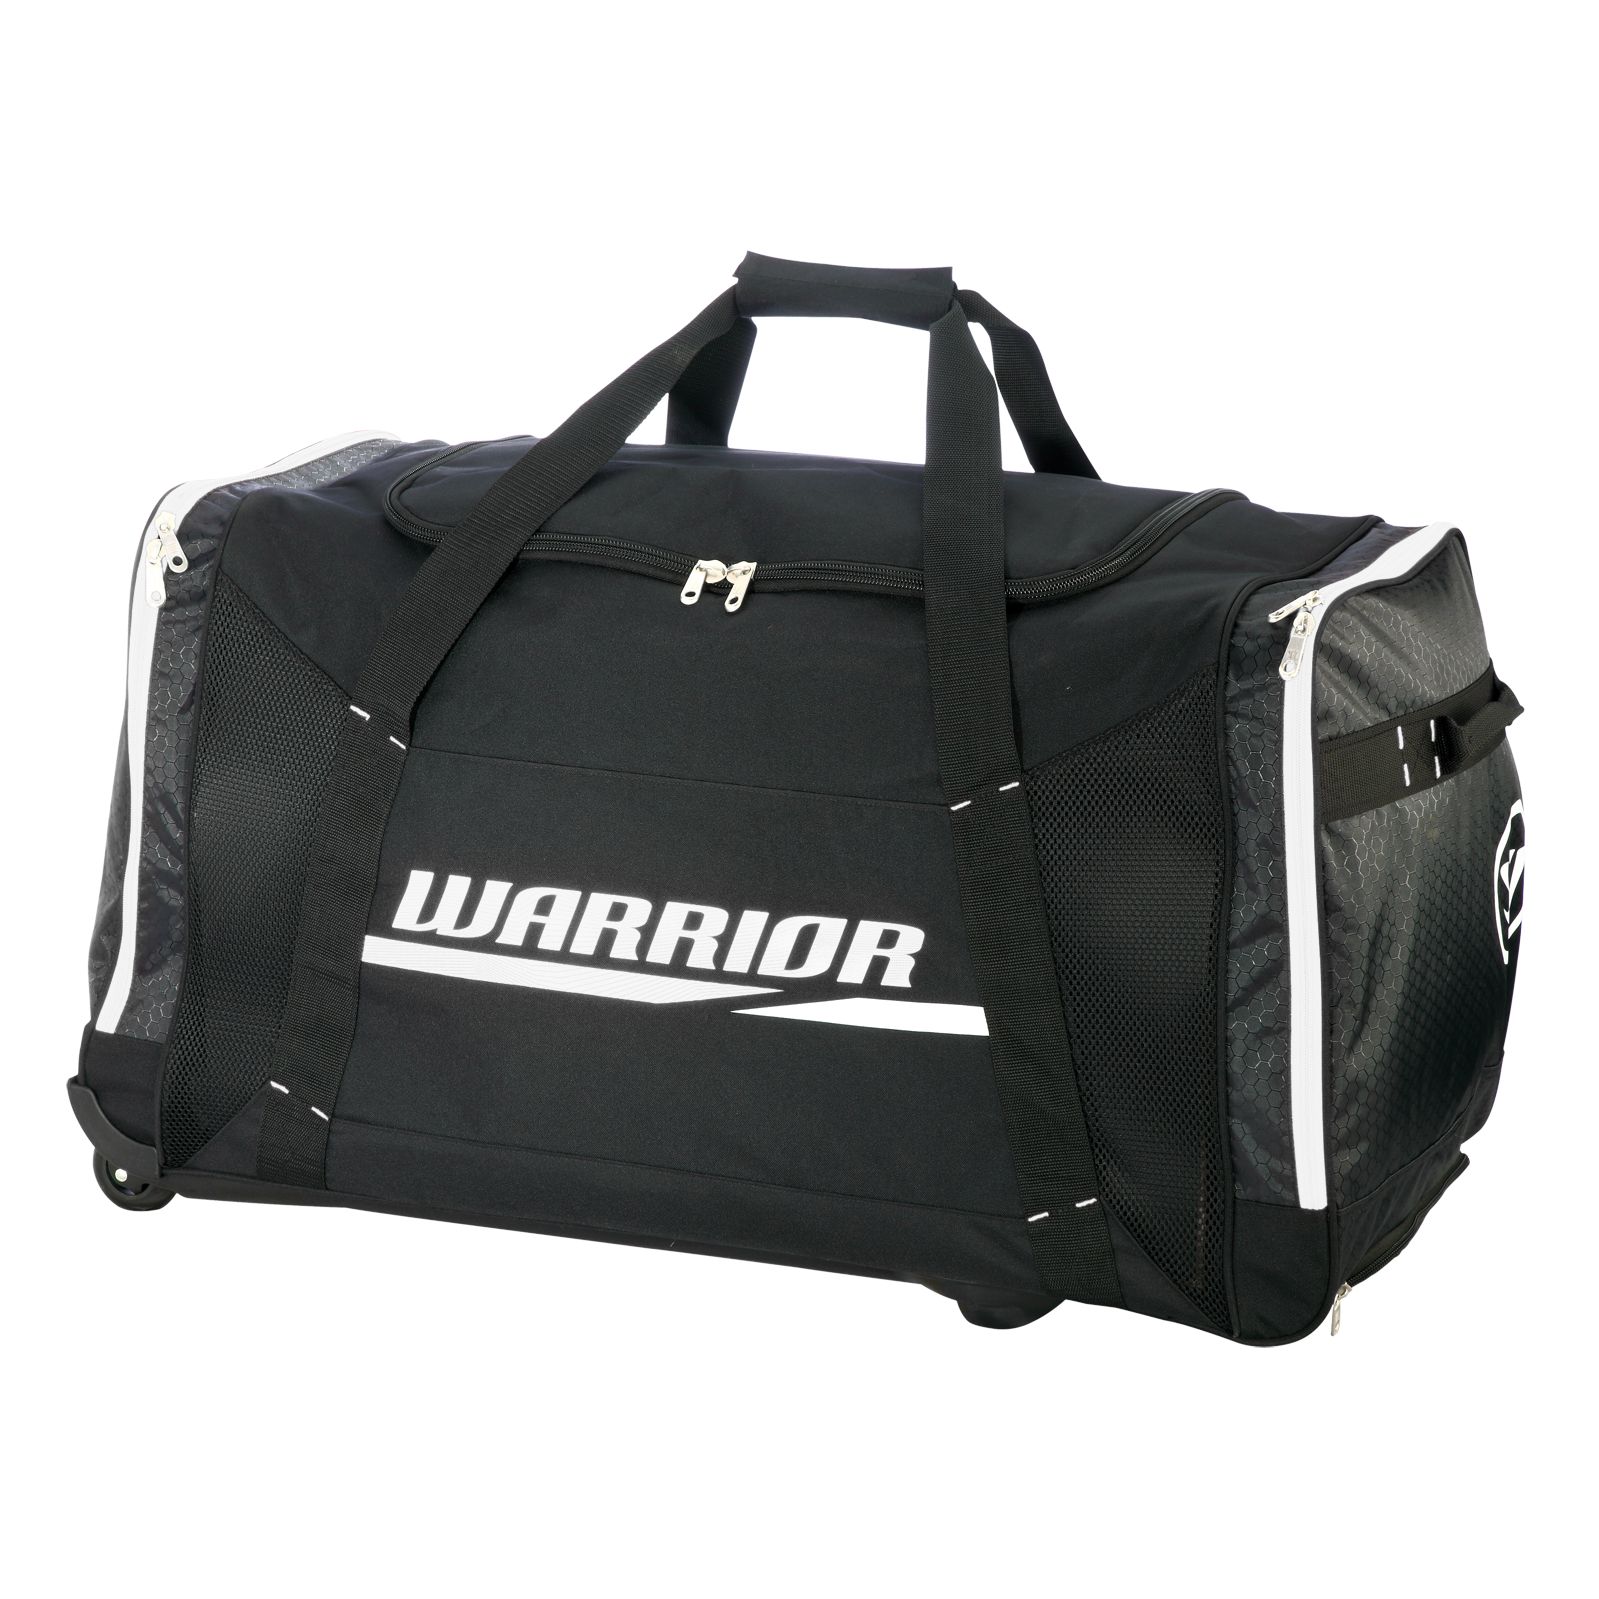 Covert Roller Bag, Black with White image number 0